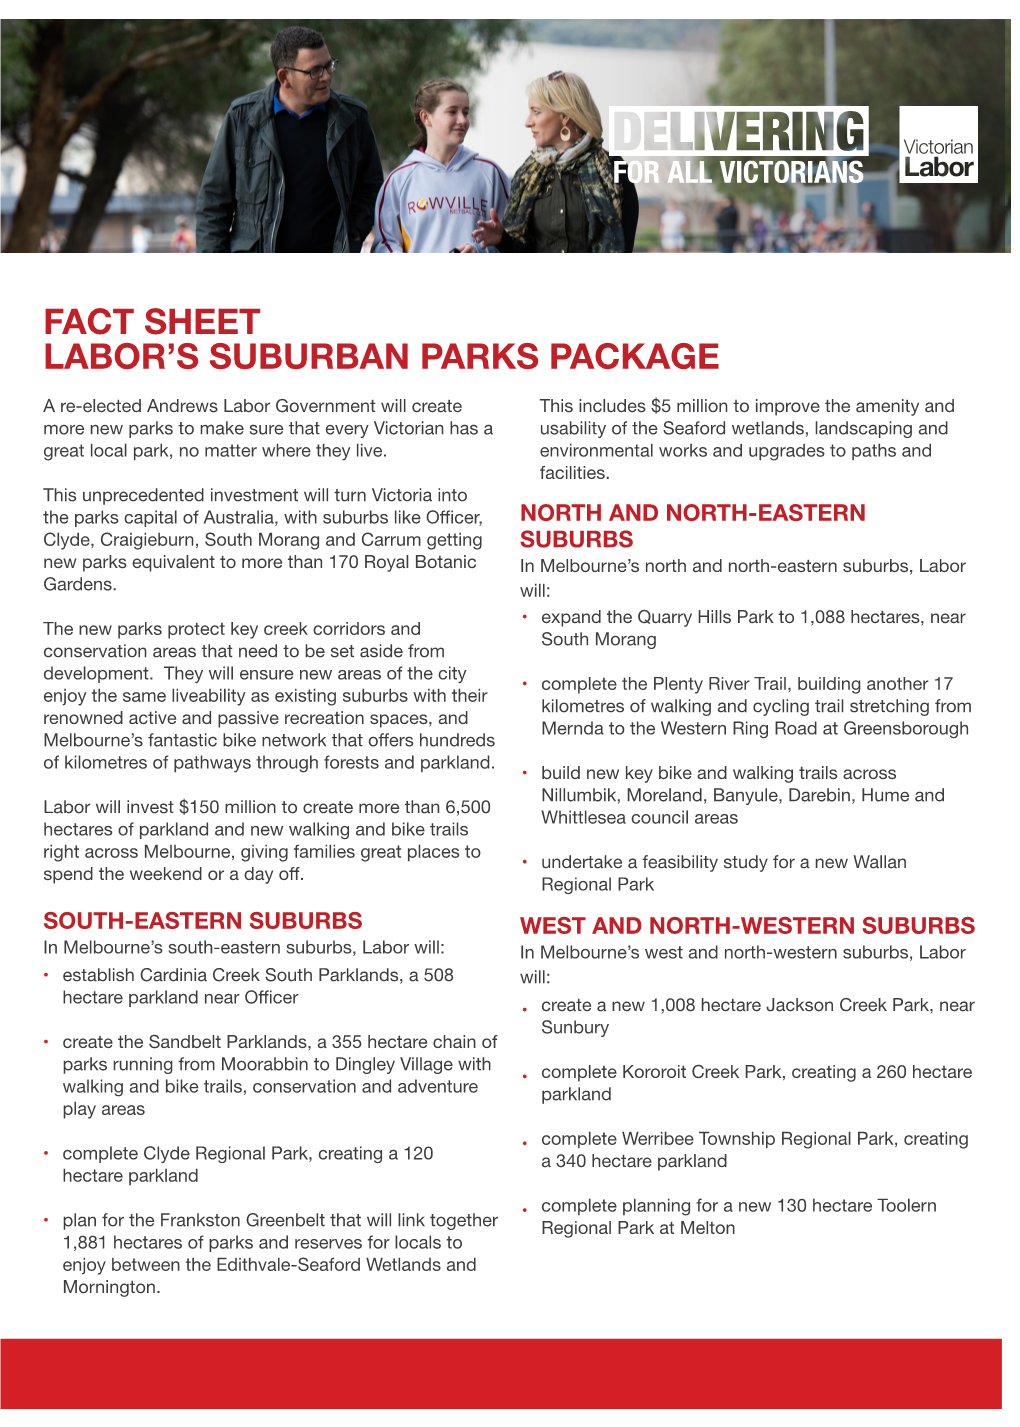 Suburban Parks Package